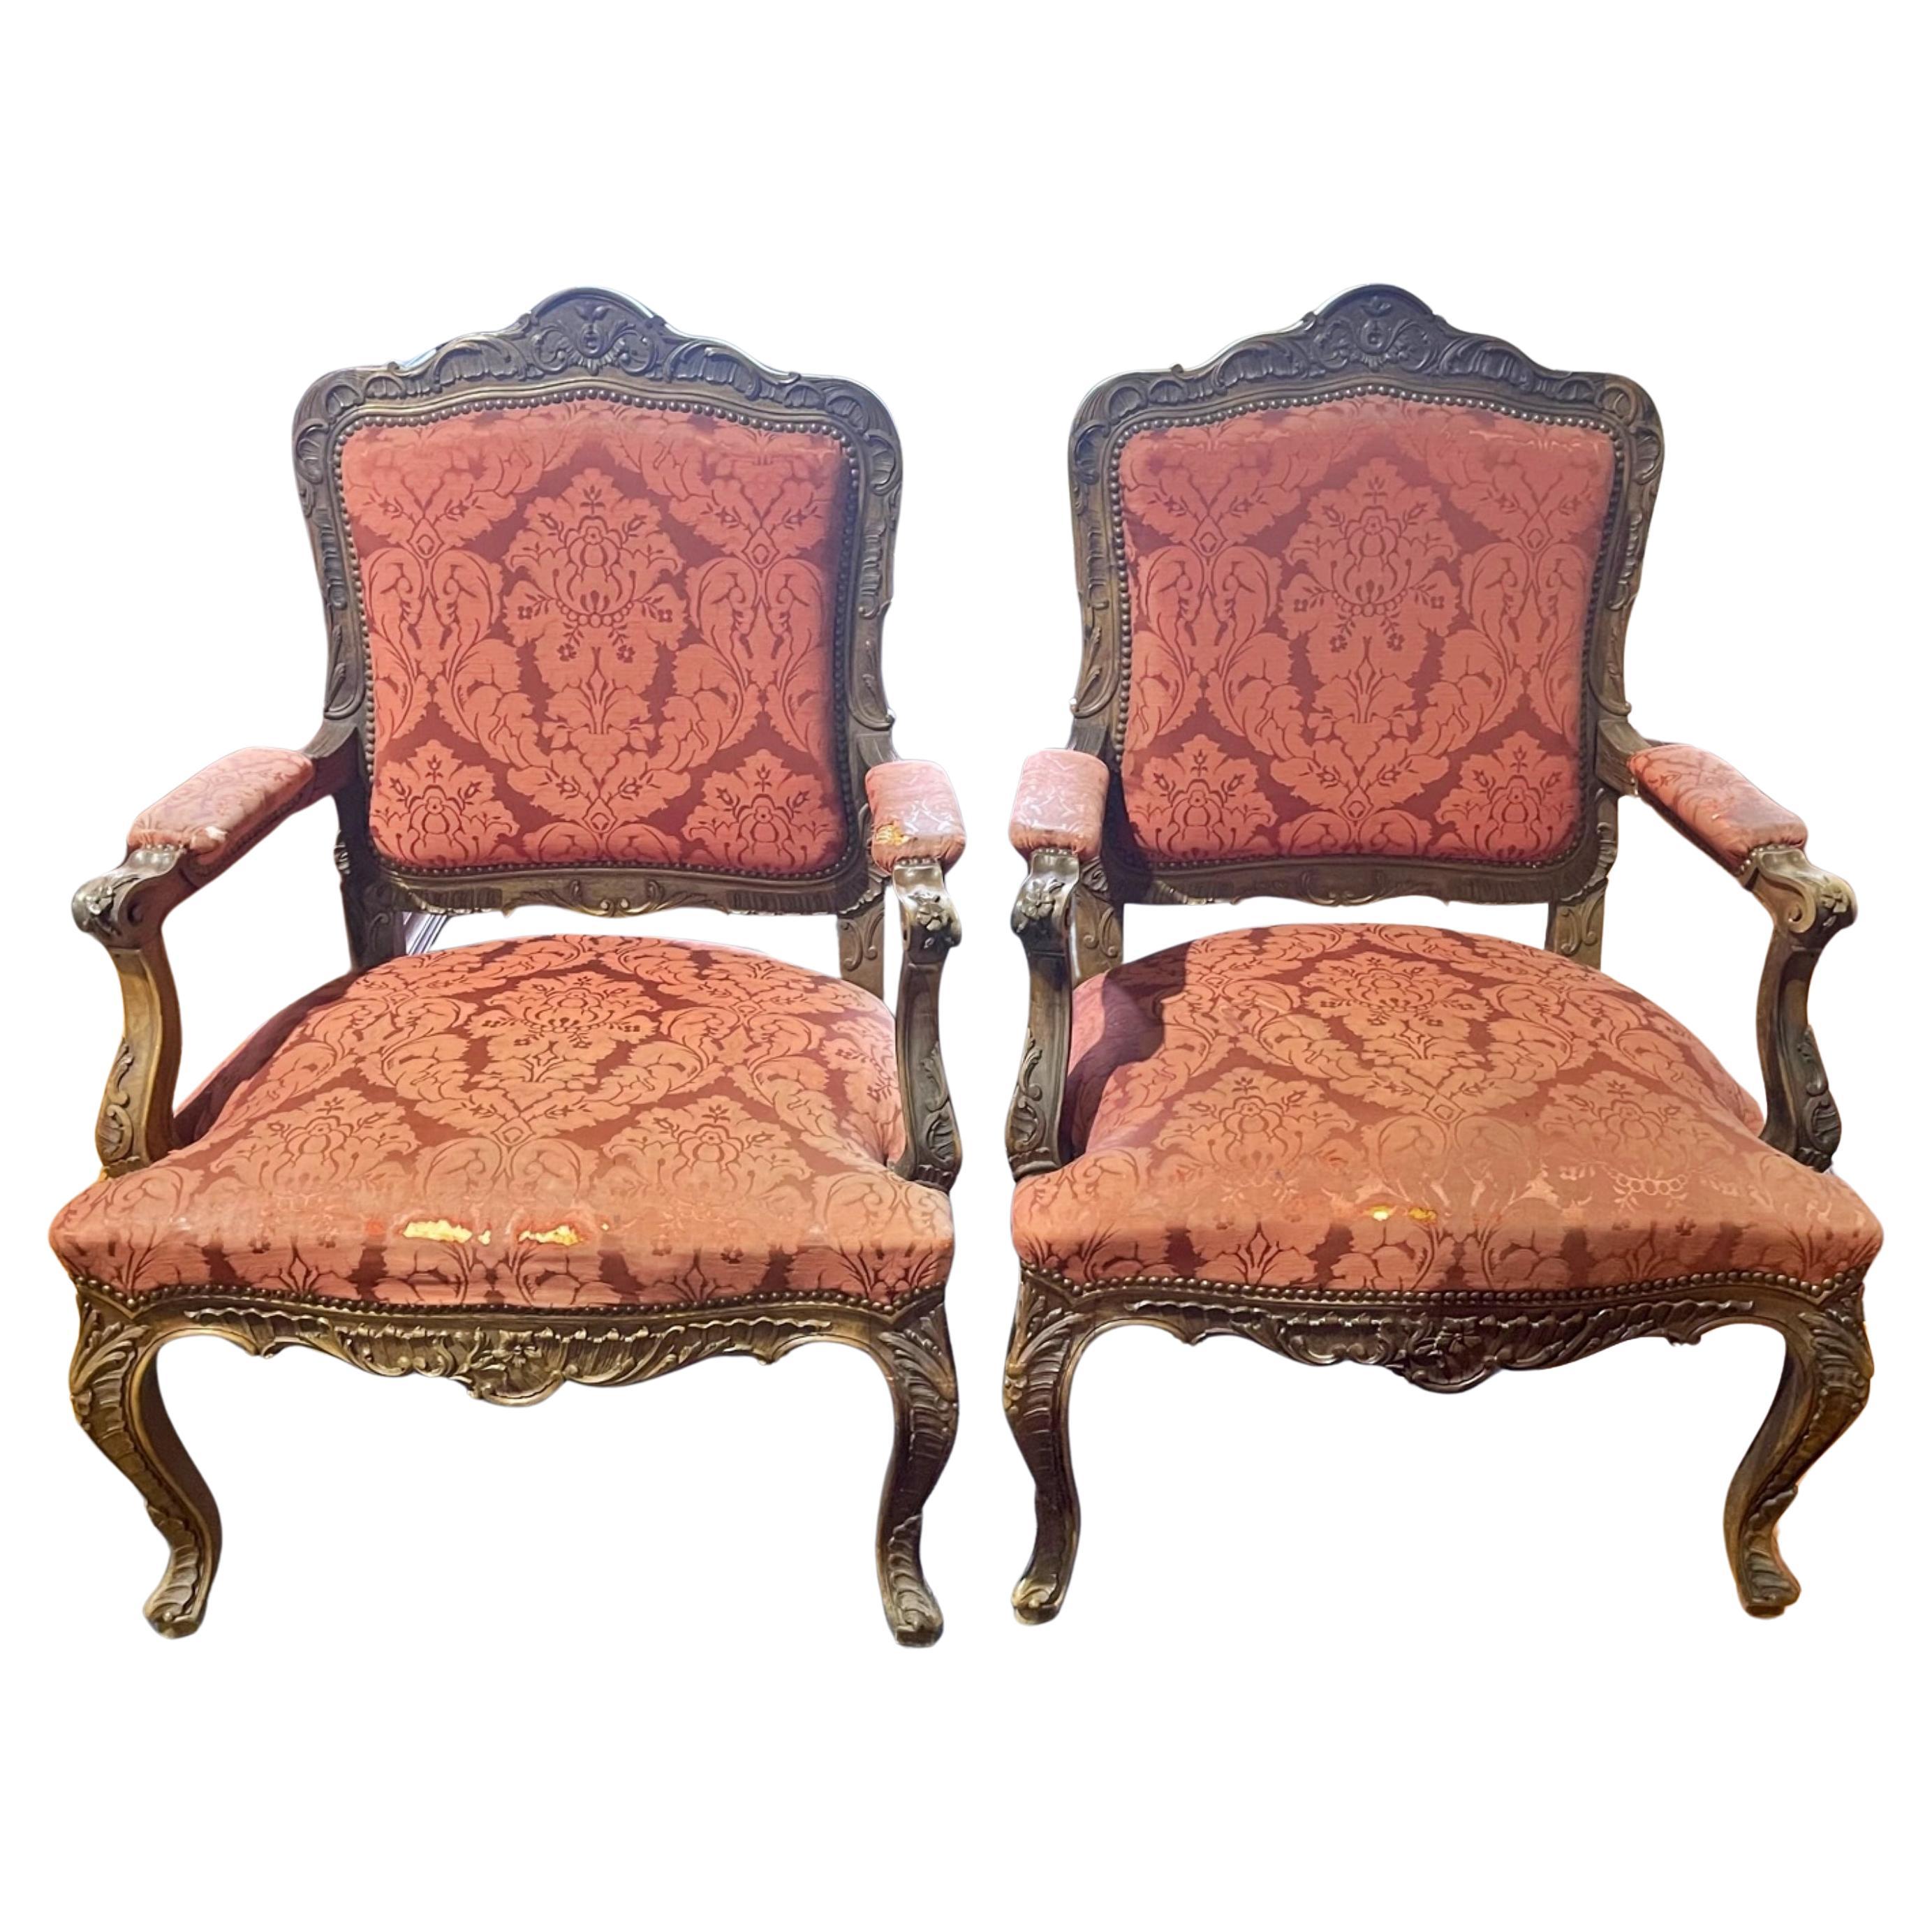 PAIR OF ARMCHAIRS LOUIS XV STYLE 19th Centuty For Sale